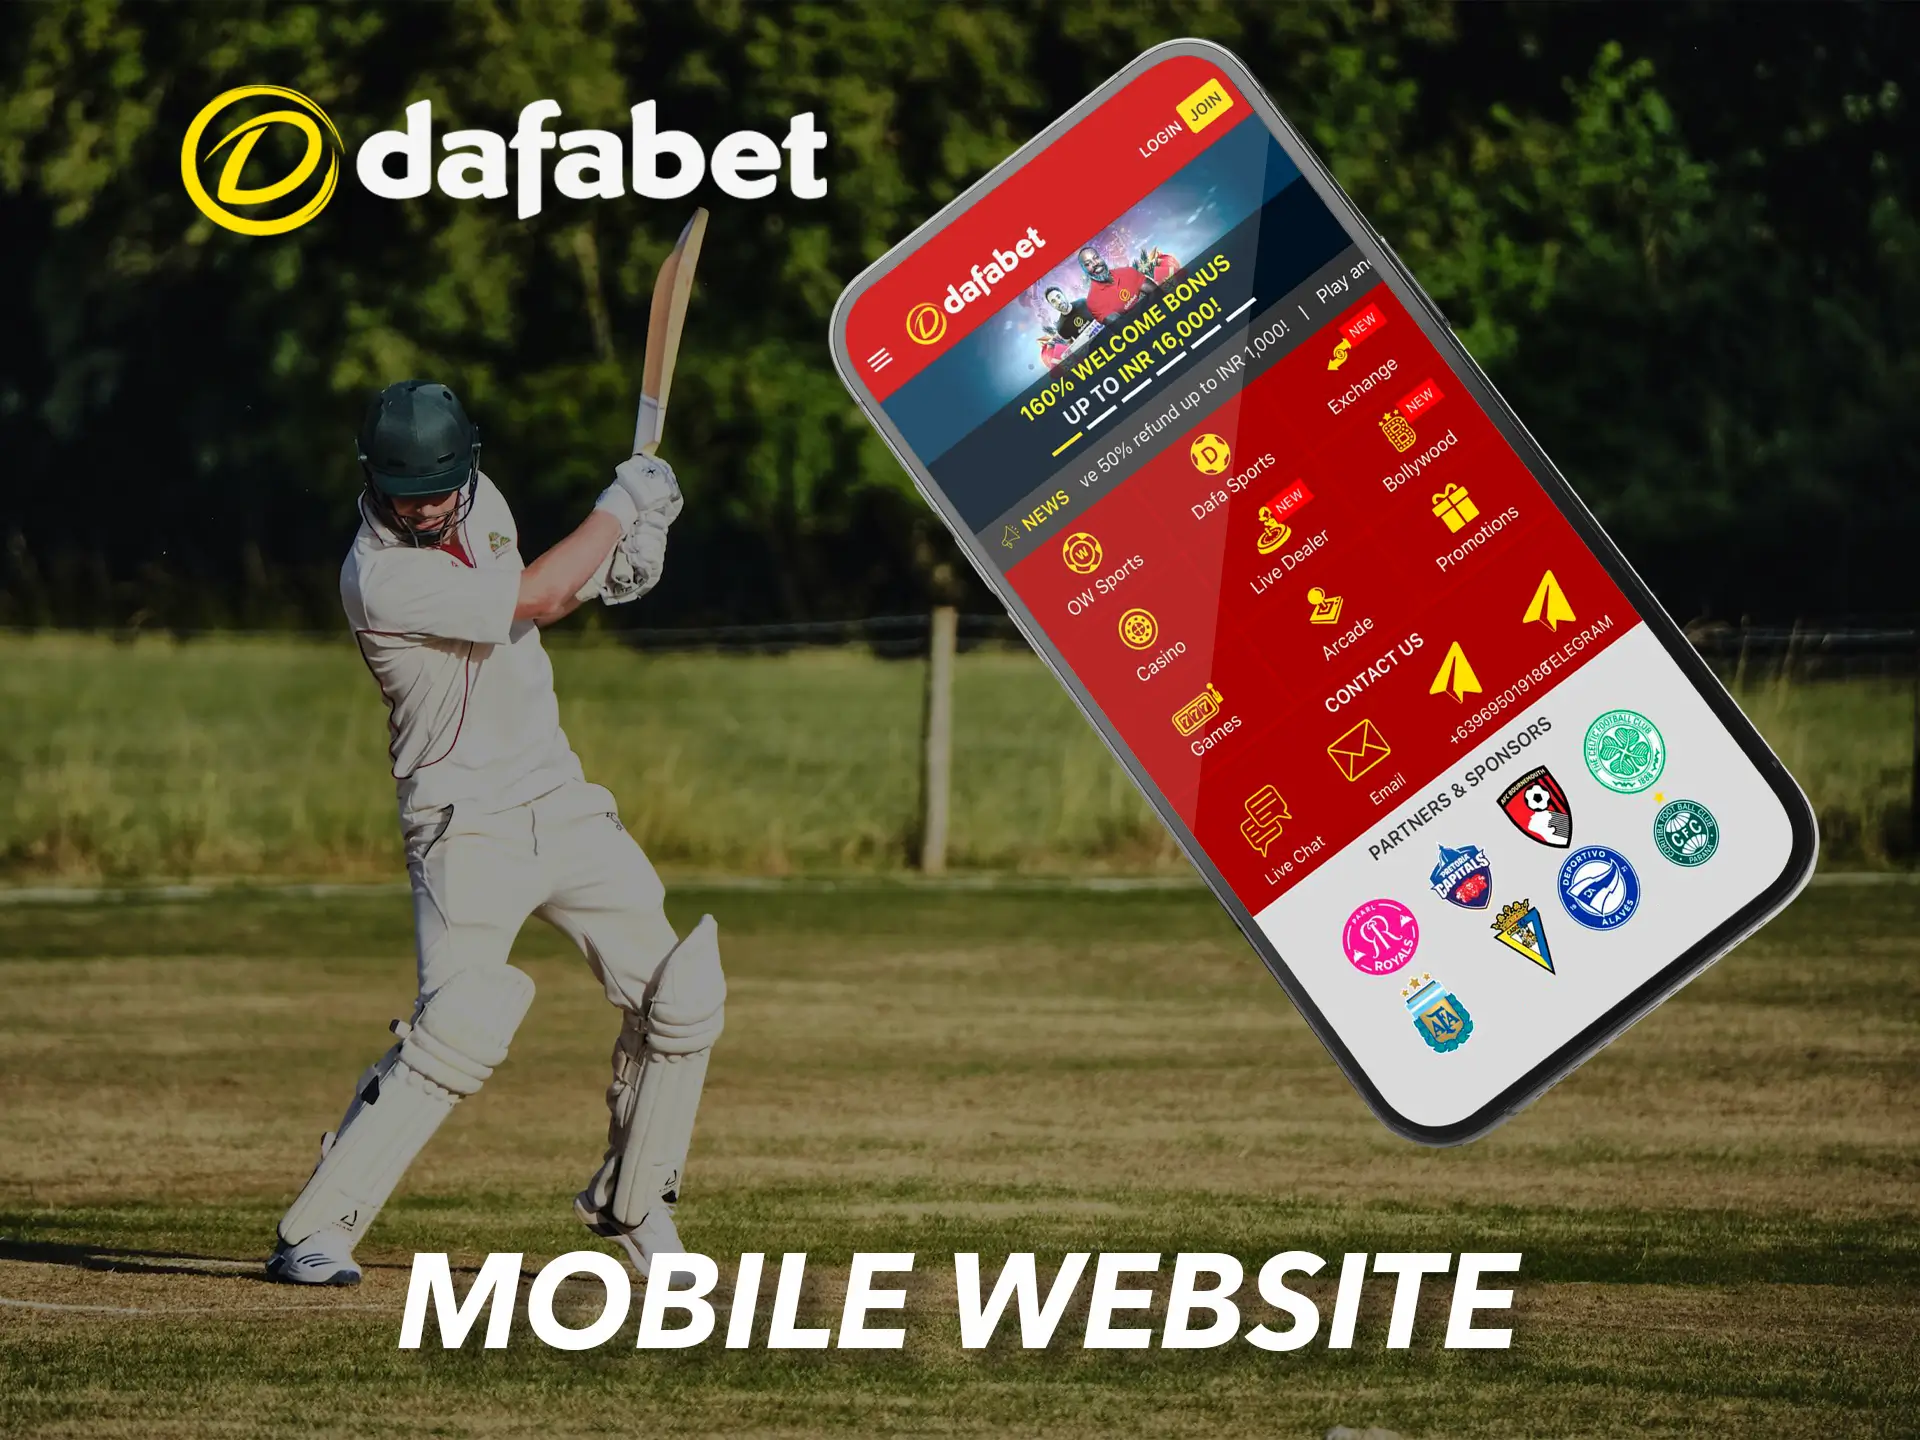 Dafabet's mobile site quickly adapts to any mobile device browser.